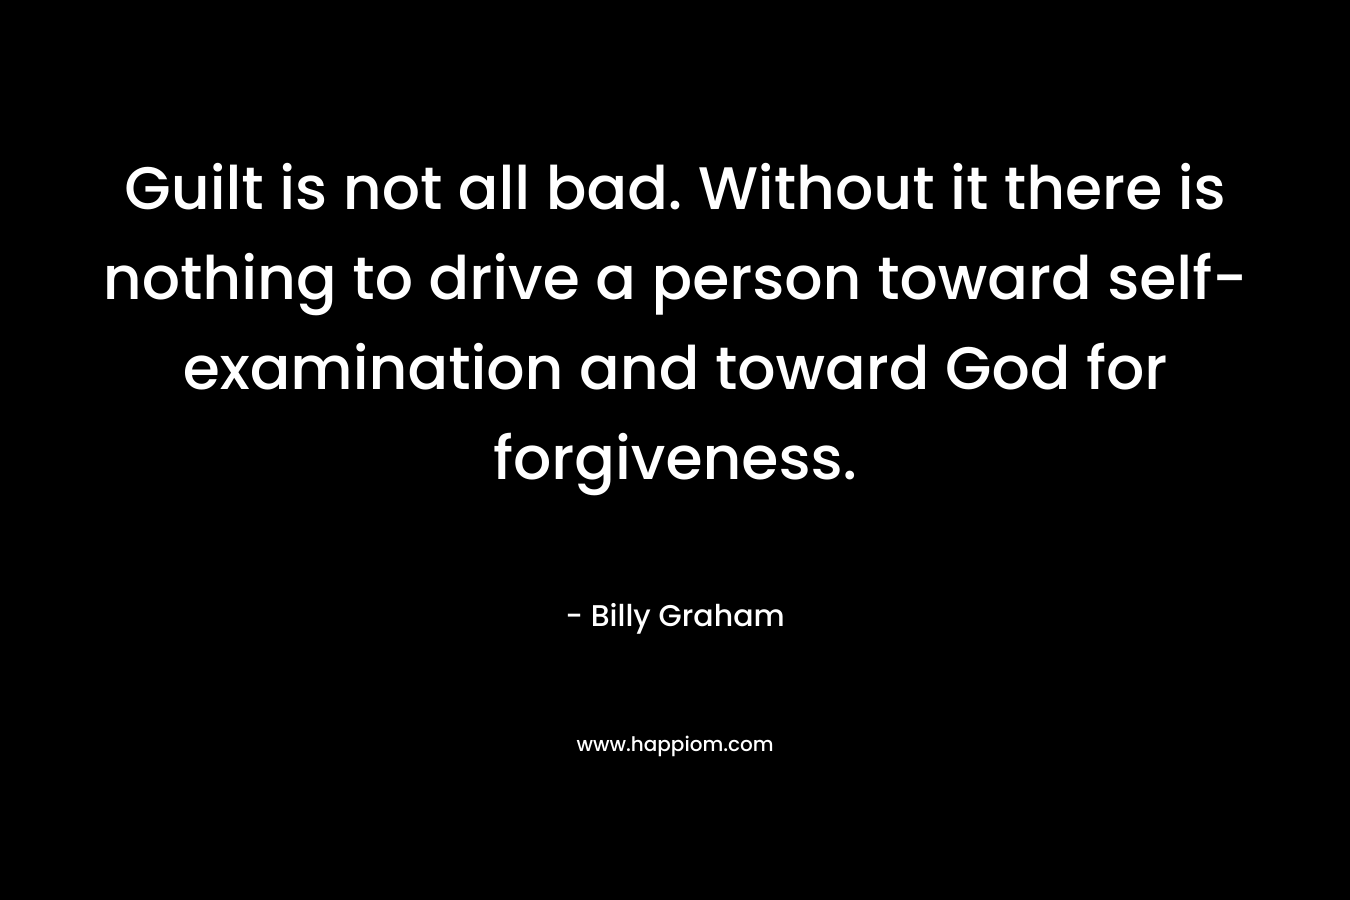 Guilt is not all bad. Without it there is nothing to drive a person toward self-examination and toward God for forgiveness.